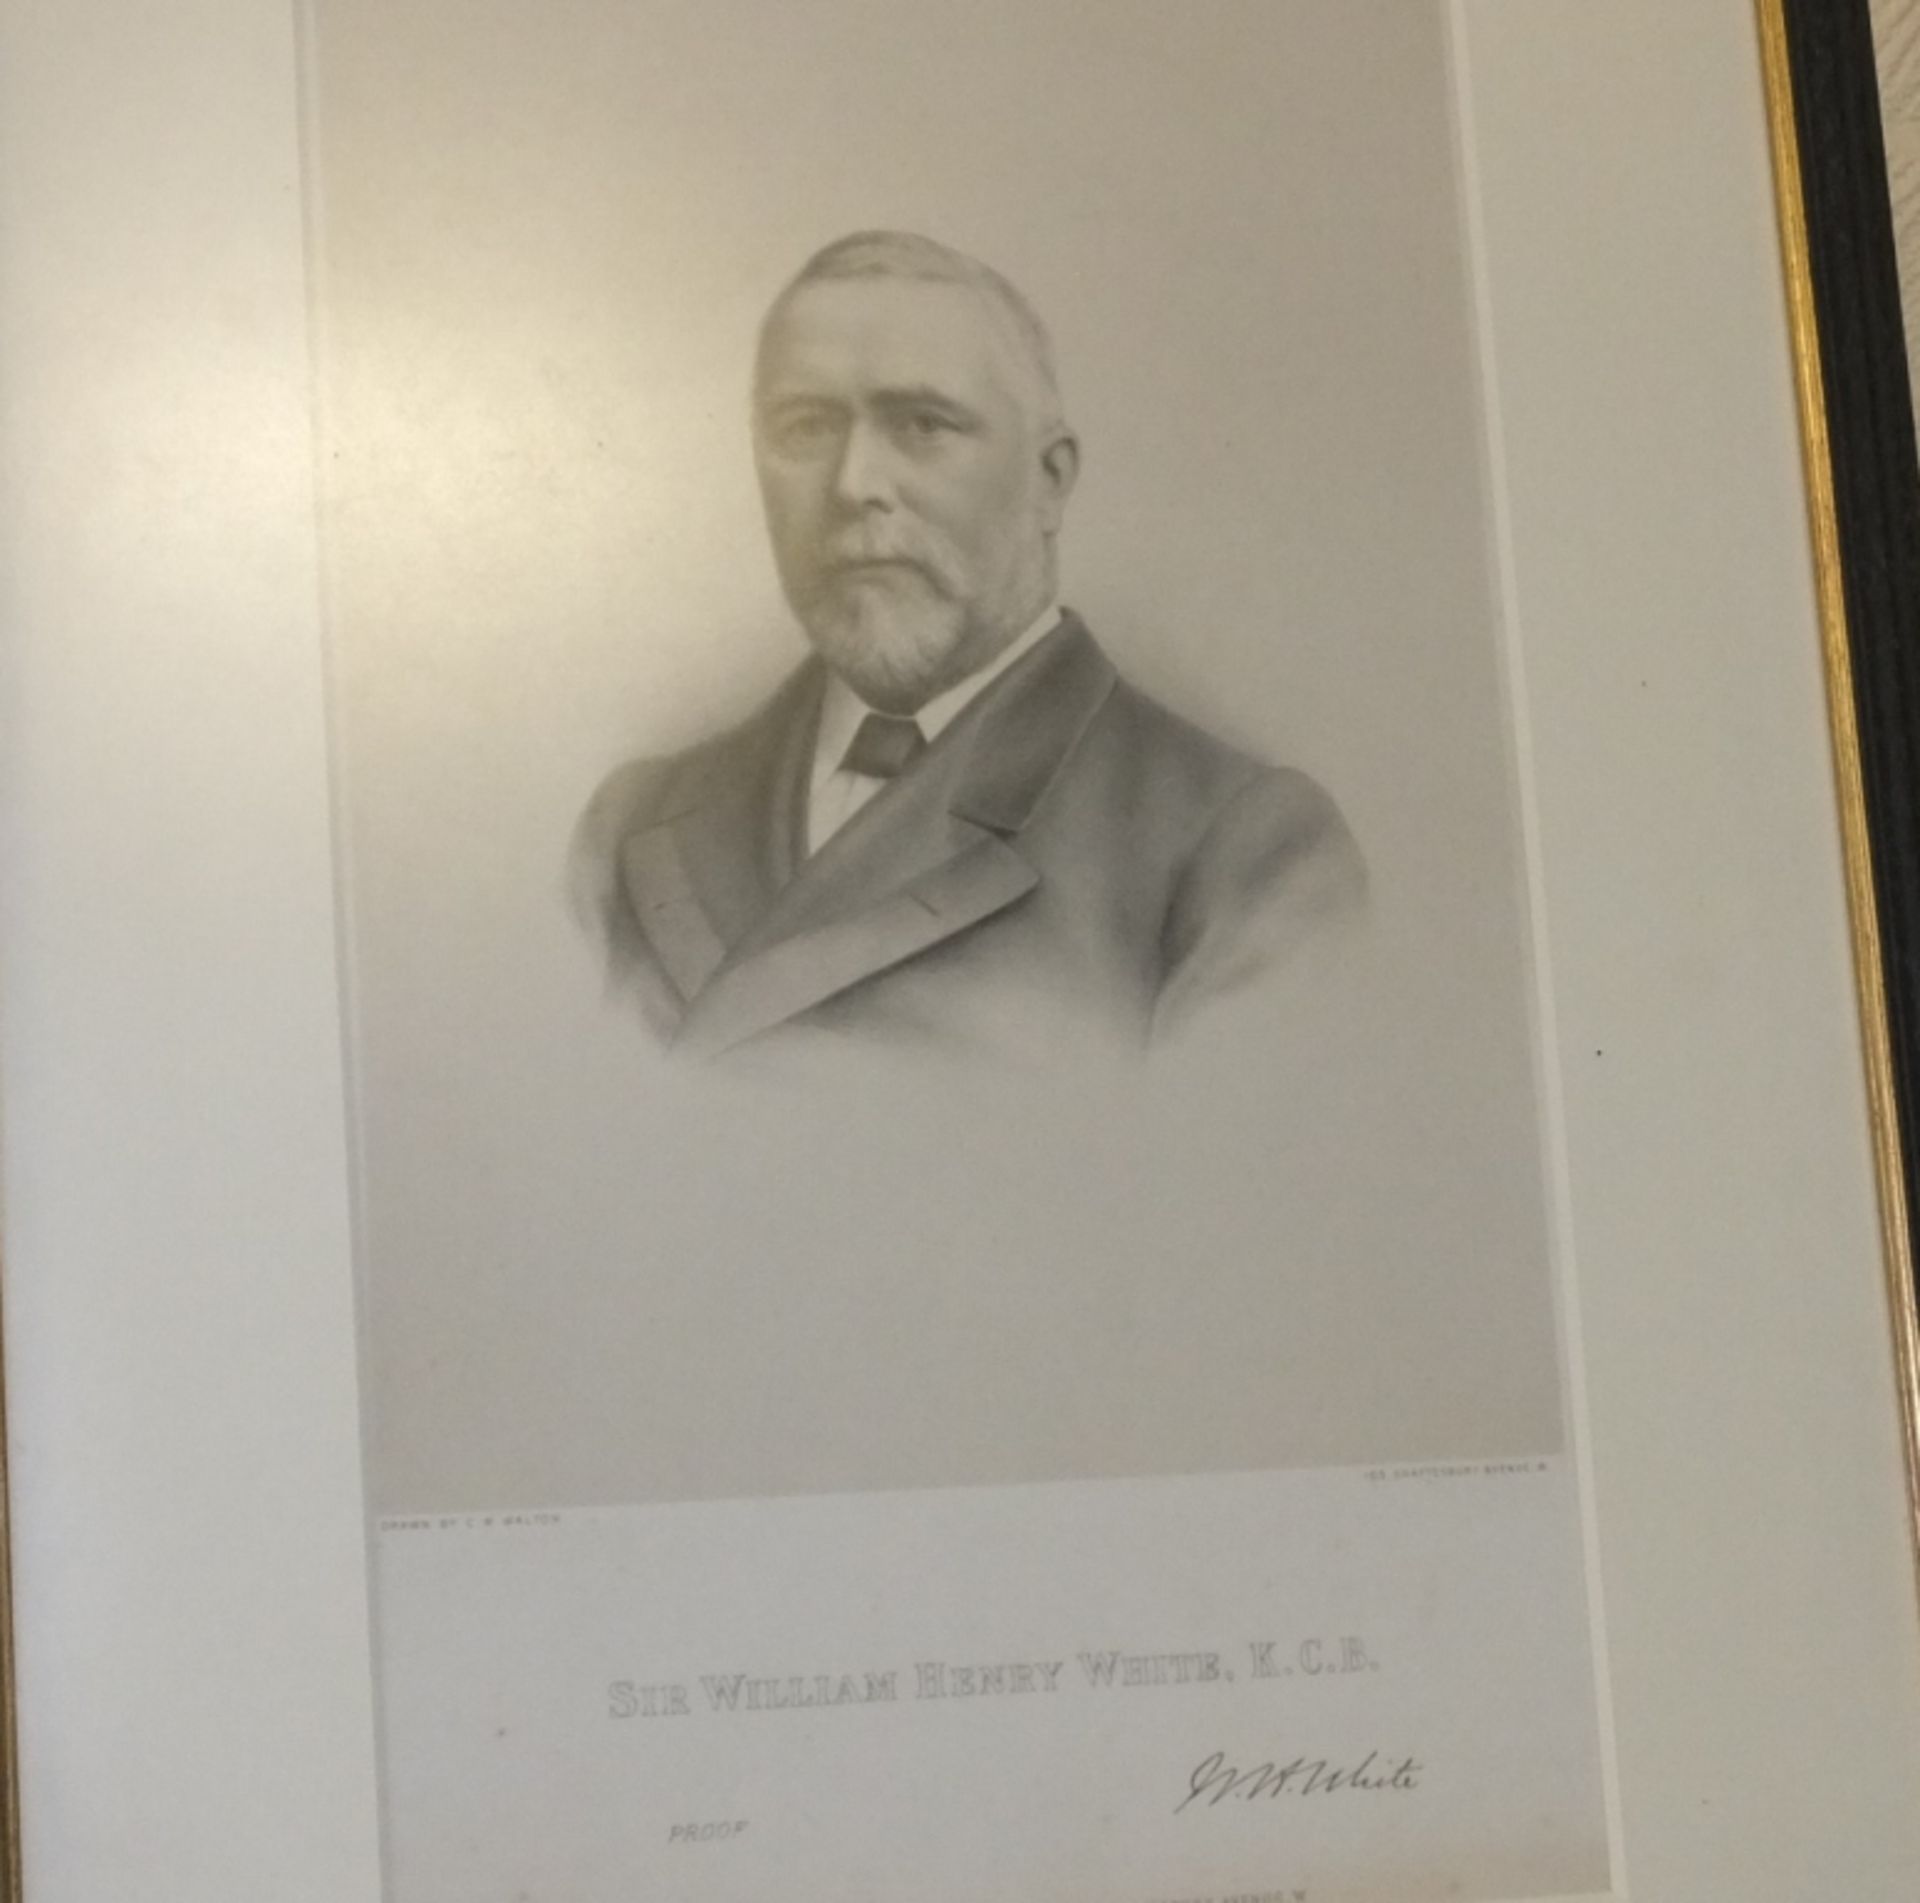 Reproduction print - Sir William Henry white KCB - Image 2 of 2